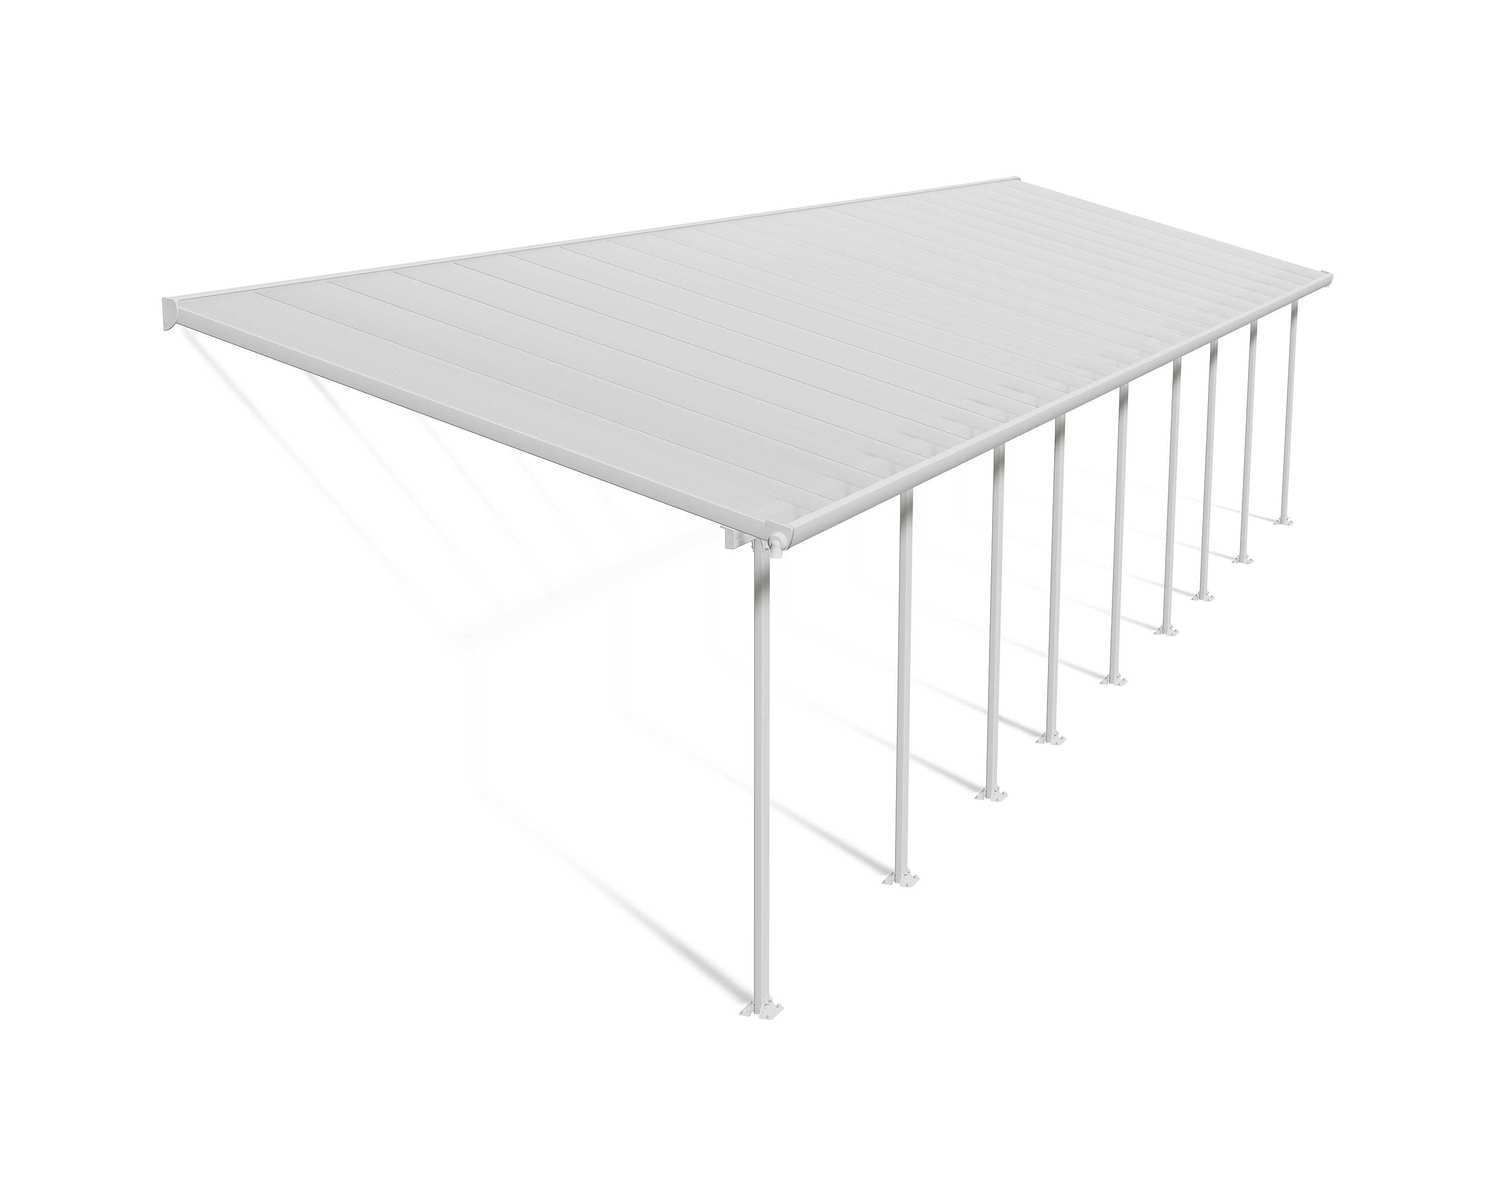 Feria 10 ft. x 42 ft. White Aluminium Patio Cover With 9 Posts, Clear Twin-Wall Polycarbonate Roof Panels.